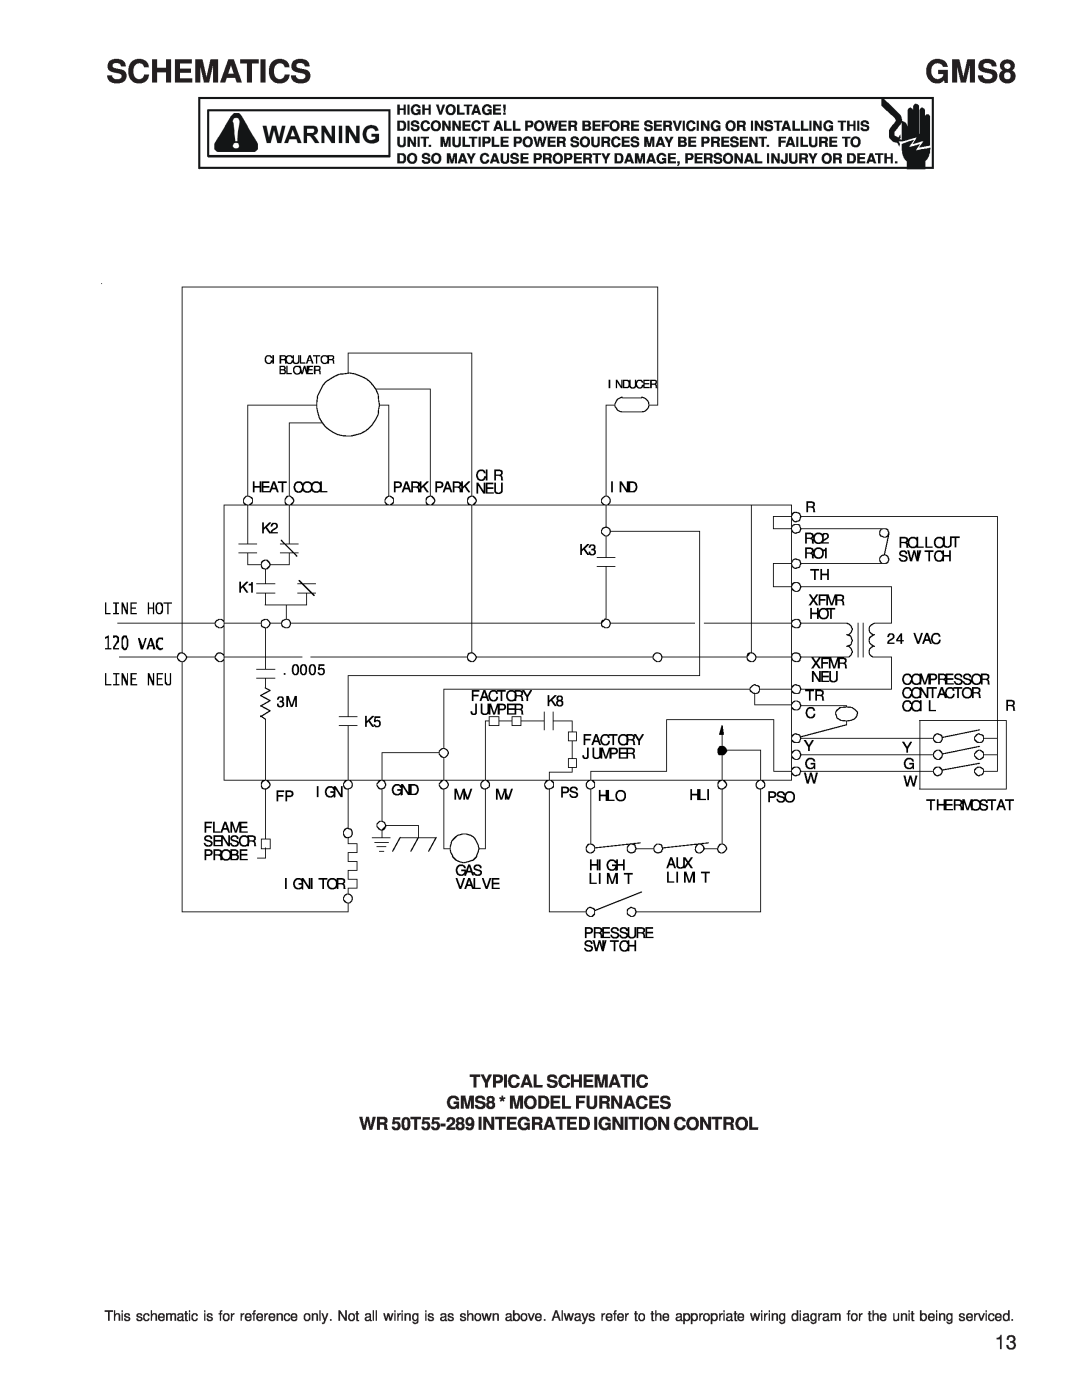 Goodman Mfg GMS8 33-3/8 GAS FURNACE UNITS, RT6621031r2 service manual Schematics, TYPICAL SCHEMATIC GMS8 * MODEL FURNACES 